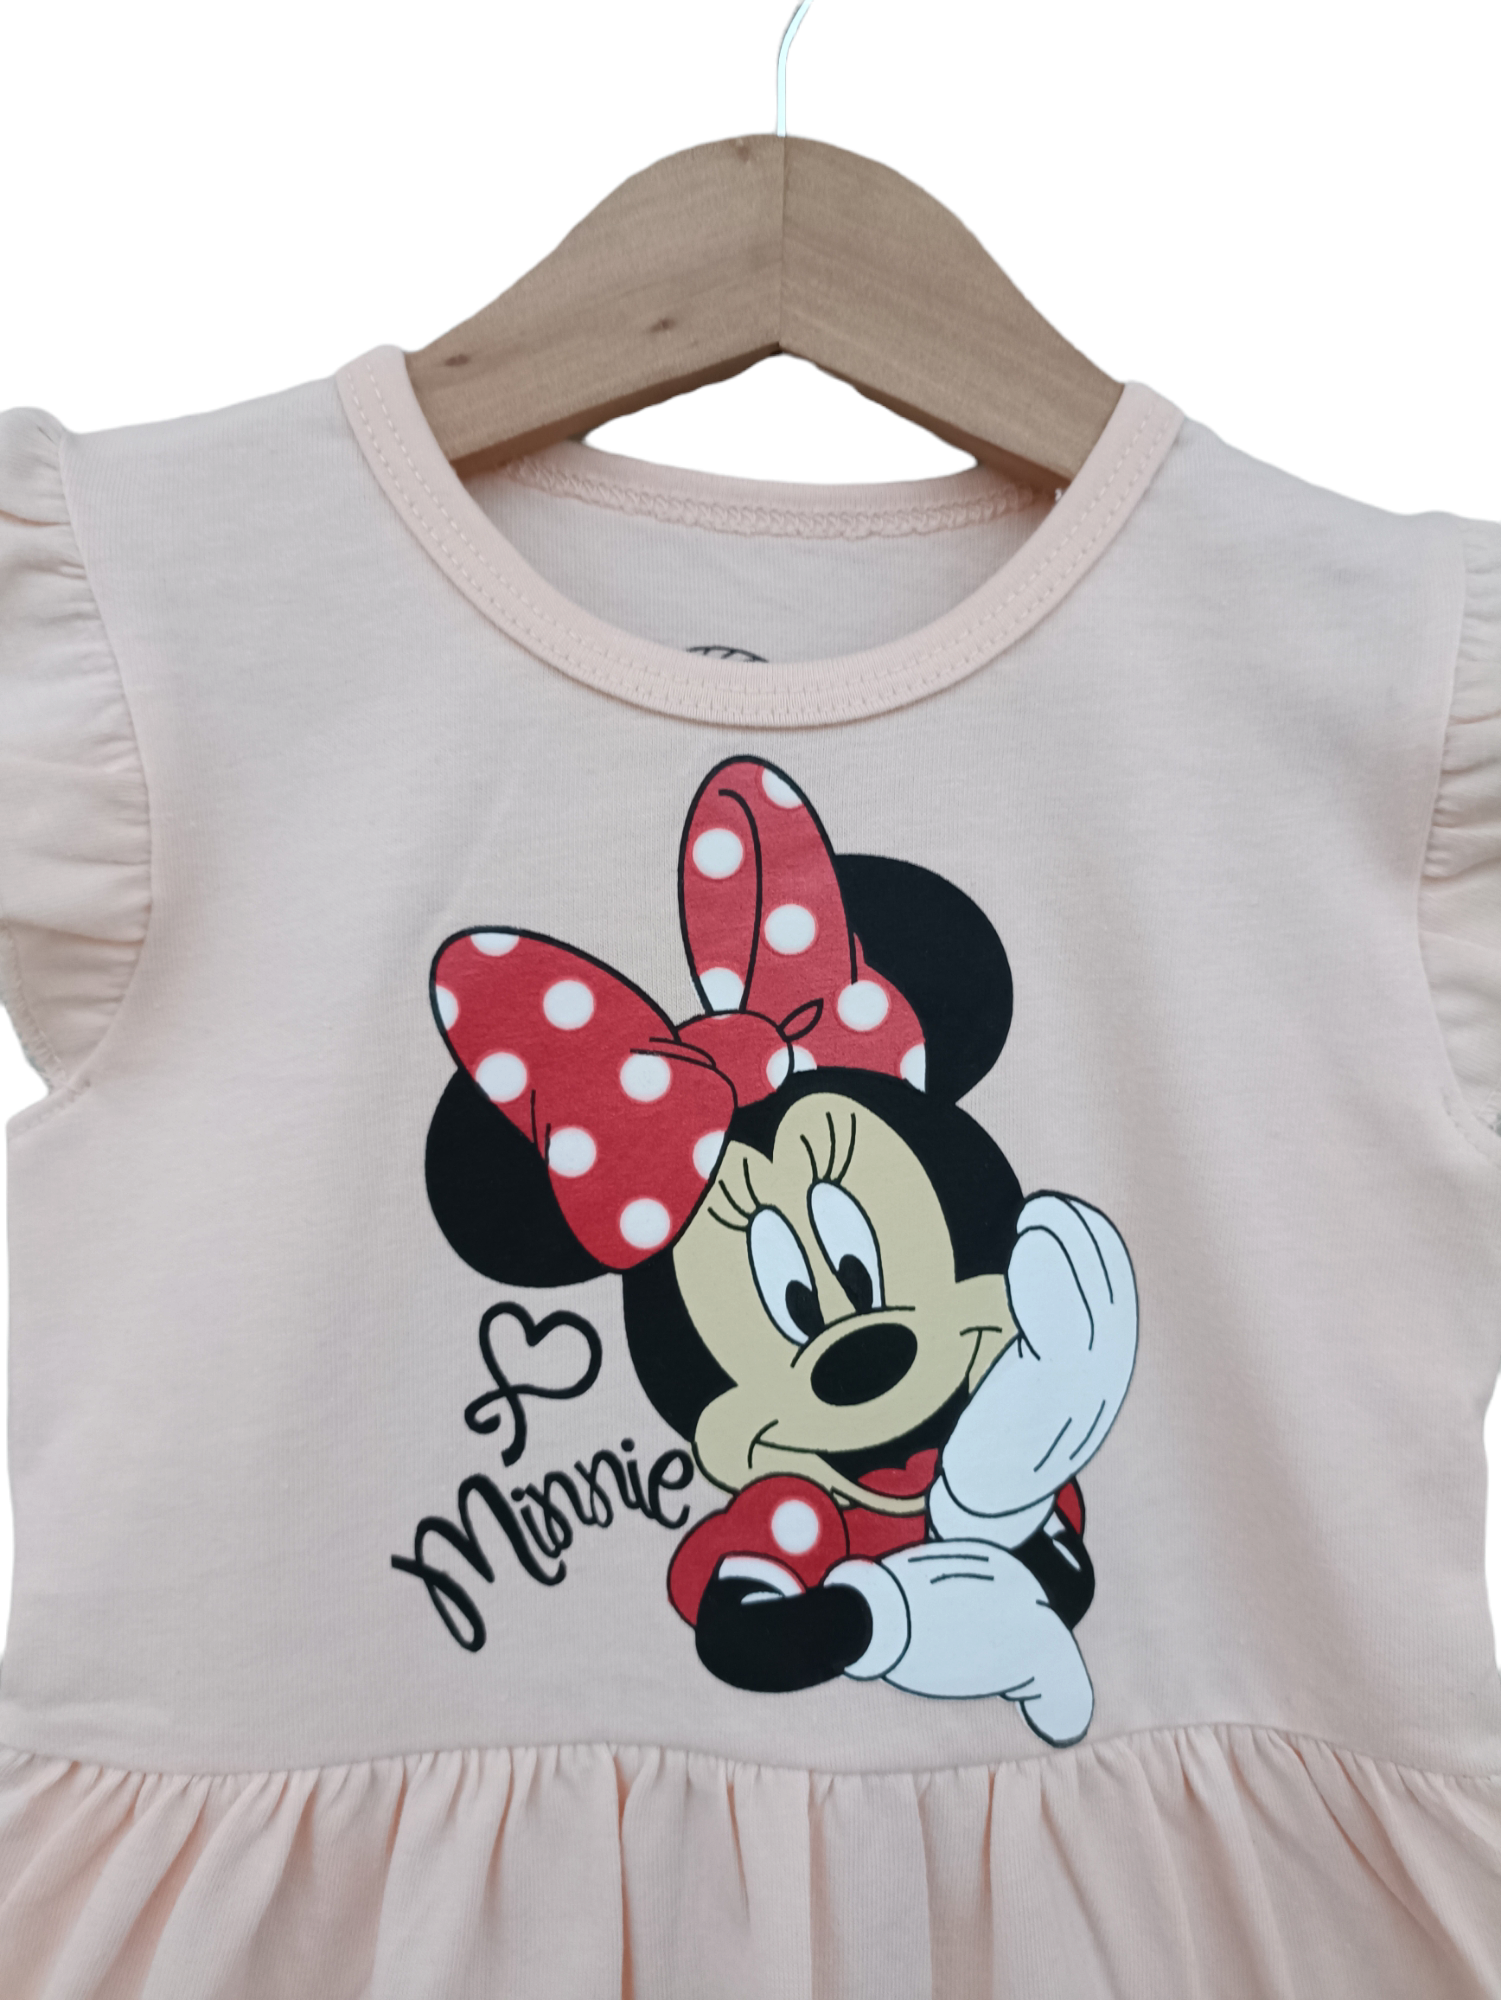 BABY TOSS MINNIE MOUSE GRAPHIC TOP